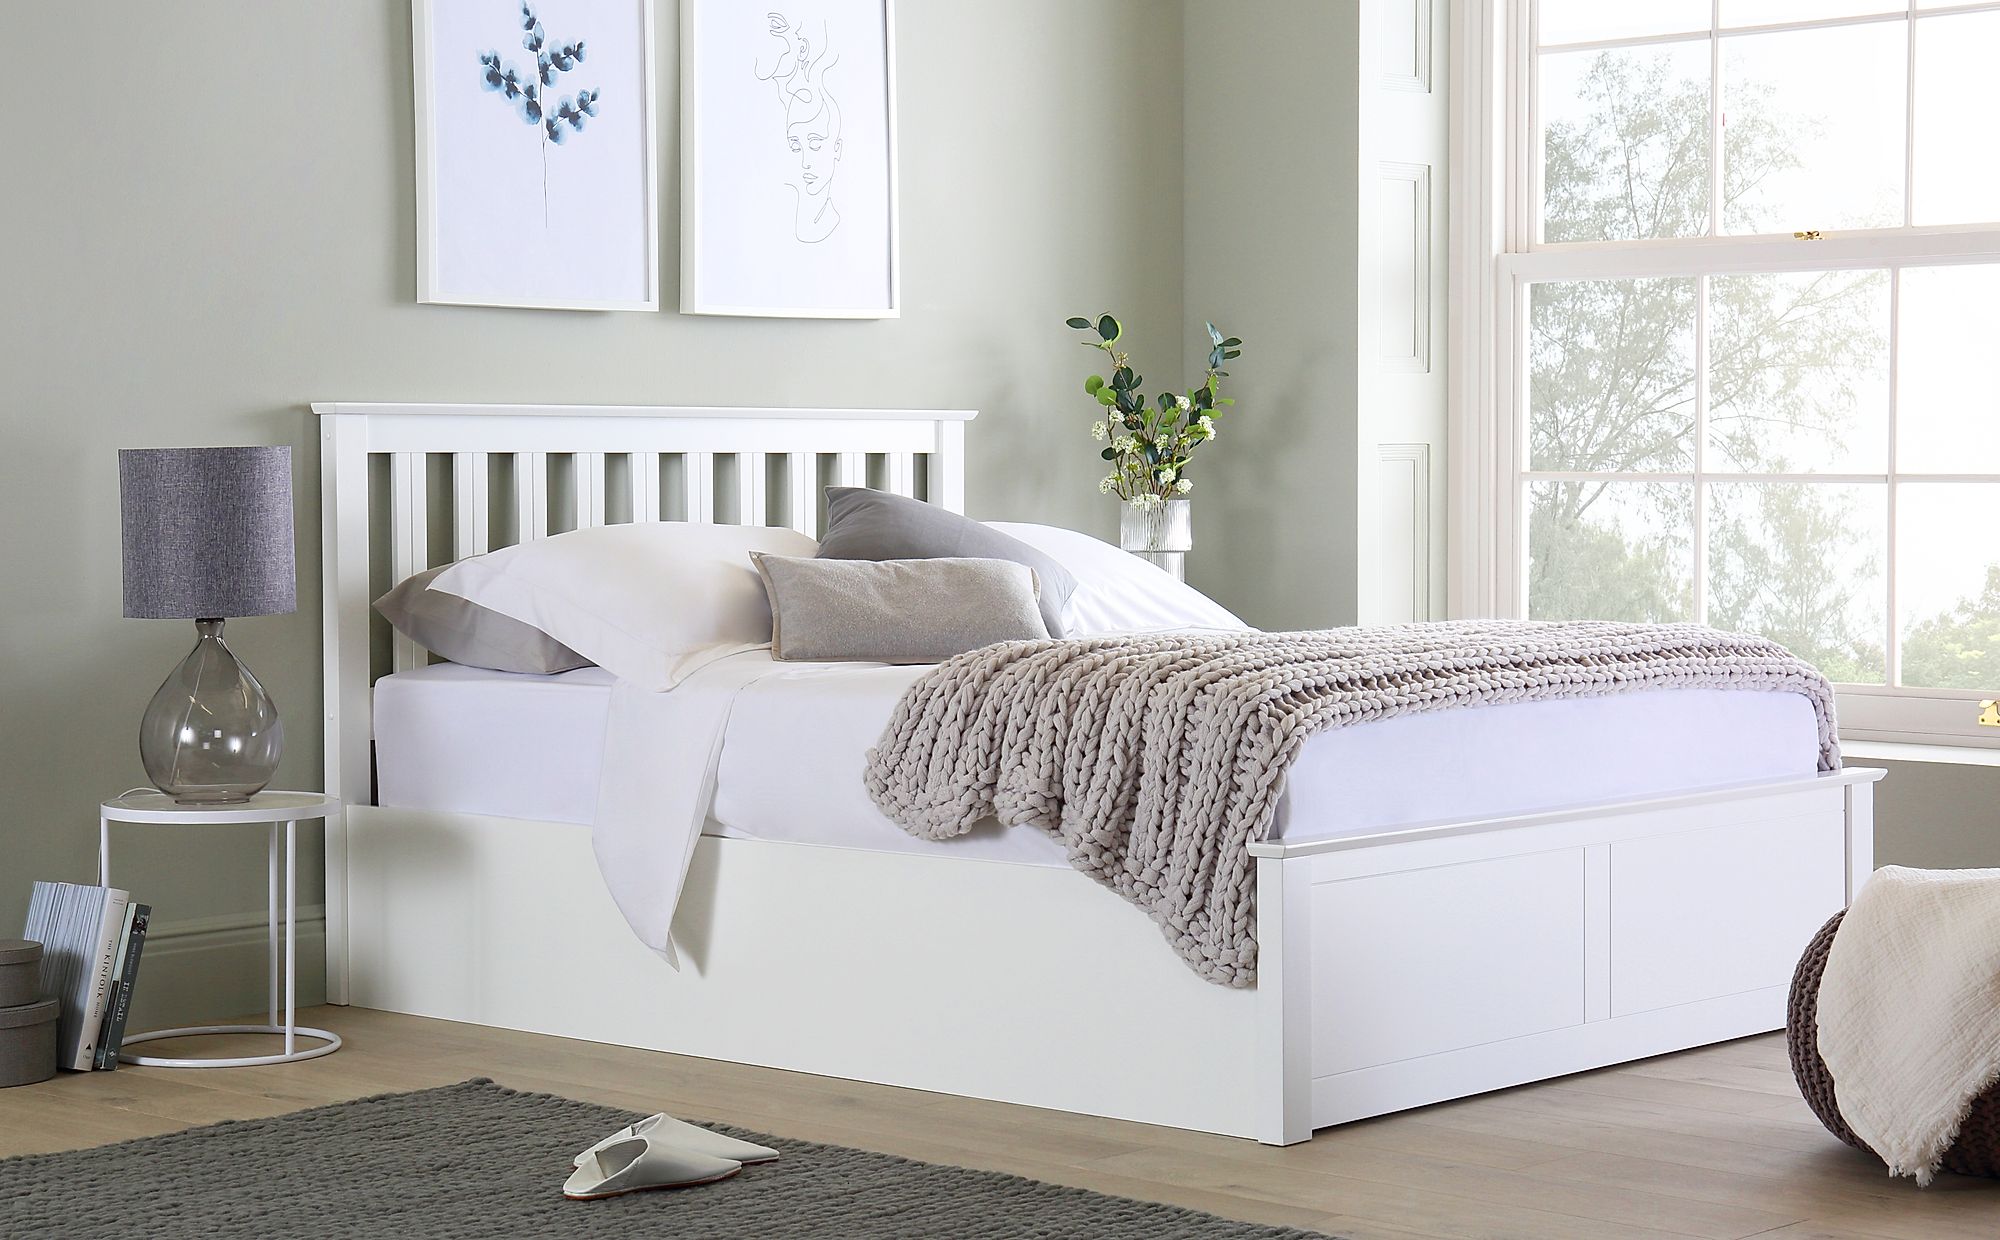 small double side opening ottoman bed with mattress